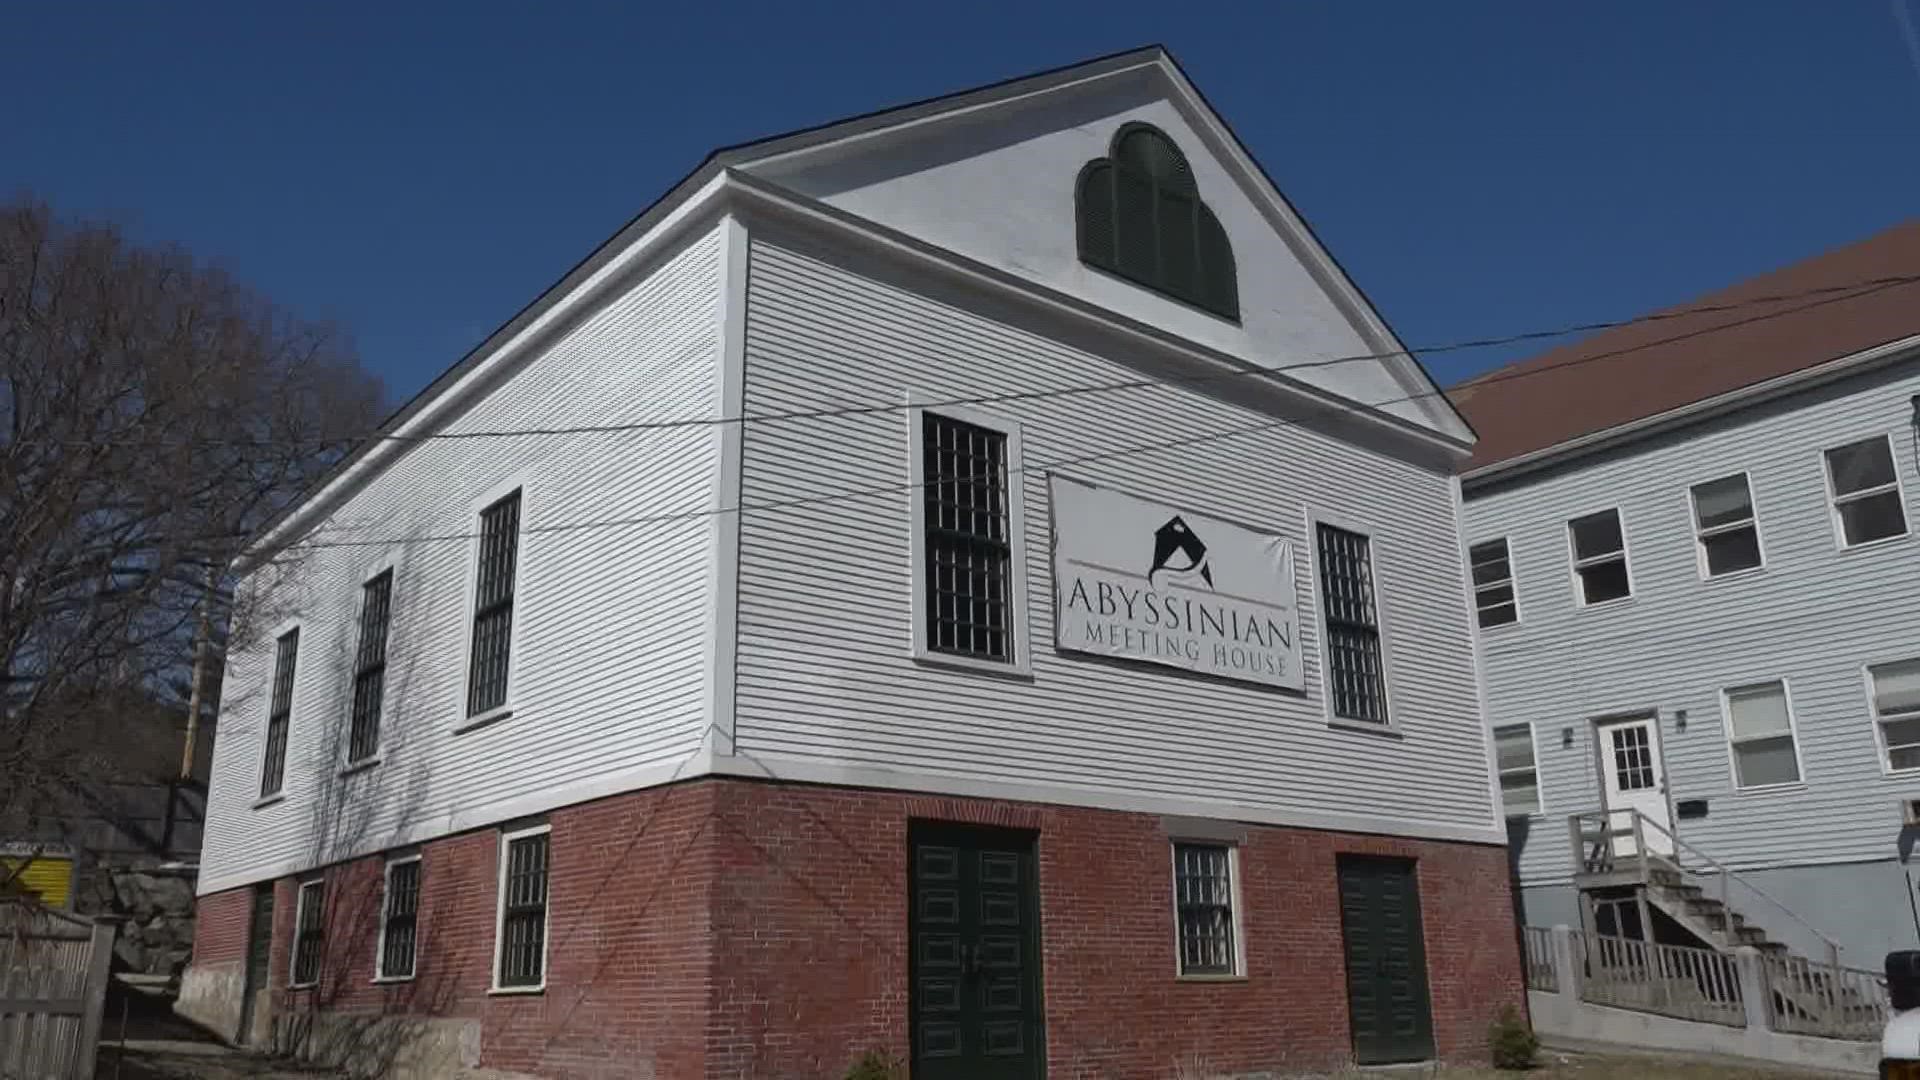 The money will help complete the final phase of the Abyssinian Meeting House's ongoing restoration project.